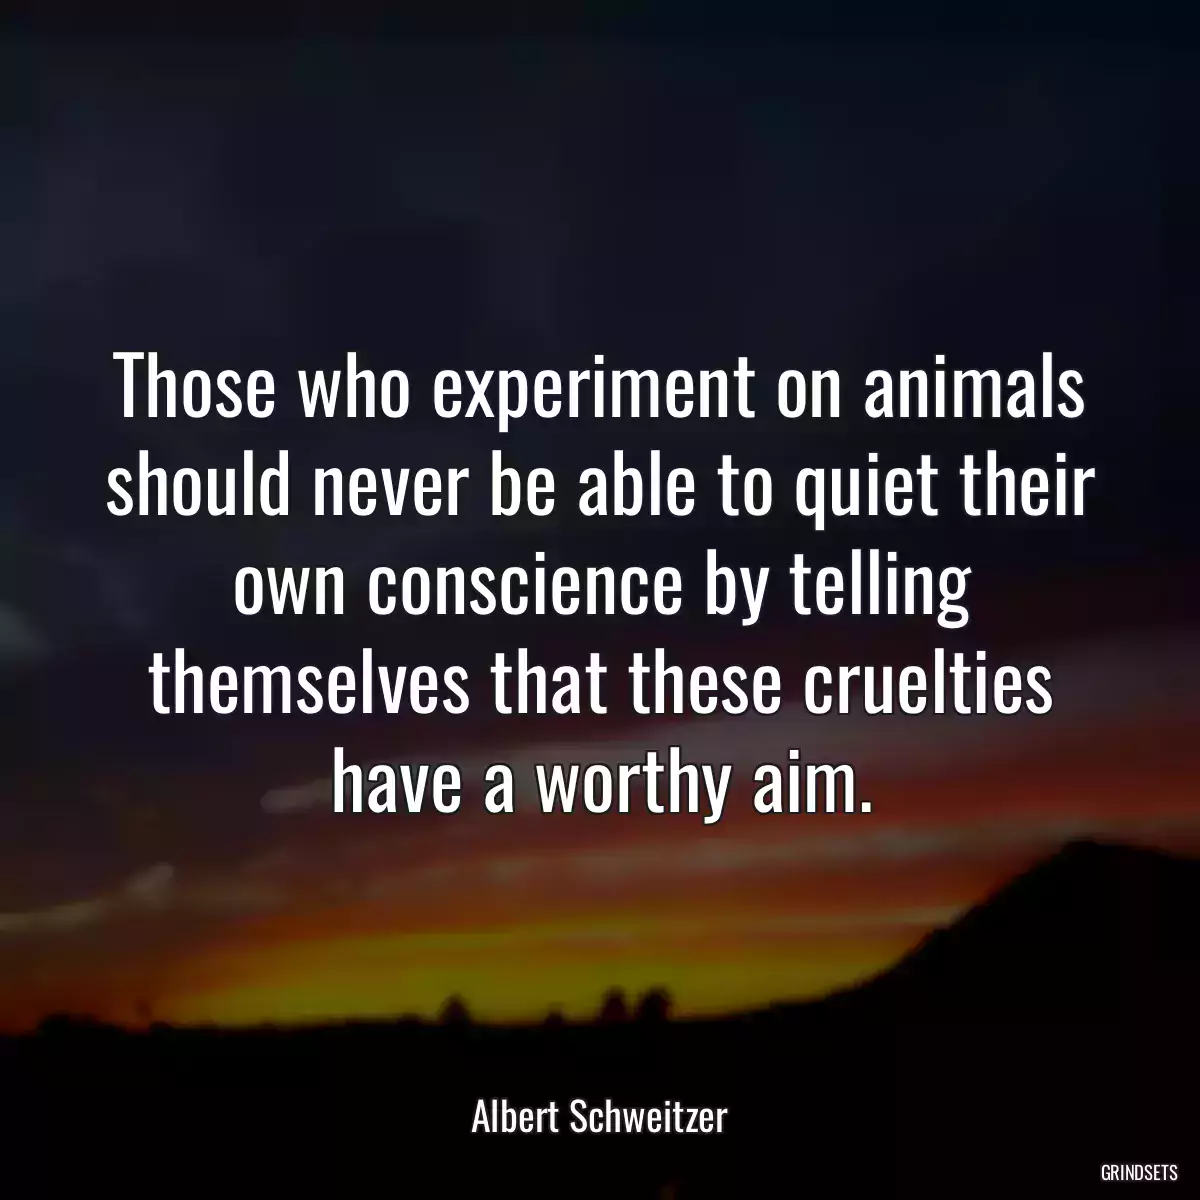 Those who experiment on animals should never be able to quiet their own conscience by telling themselves that these cruelties have a worthy aim.